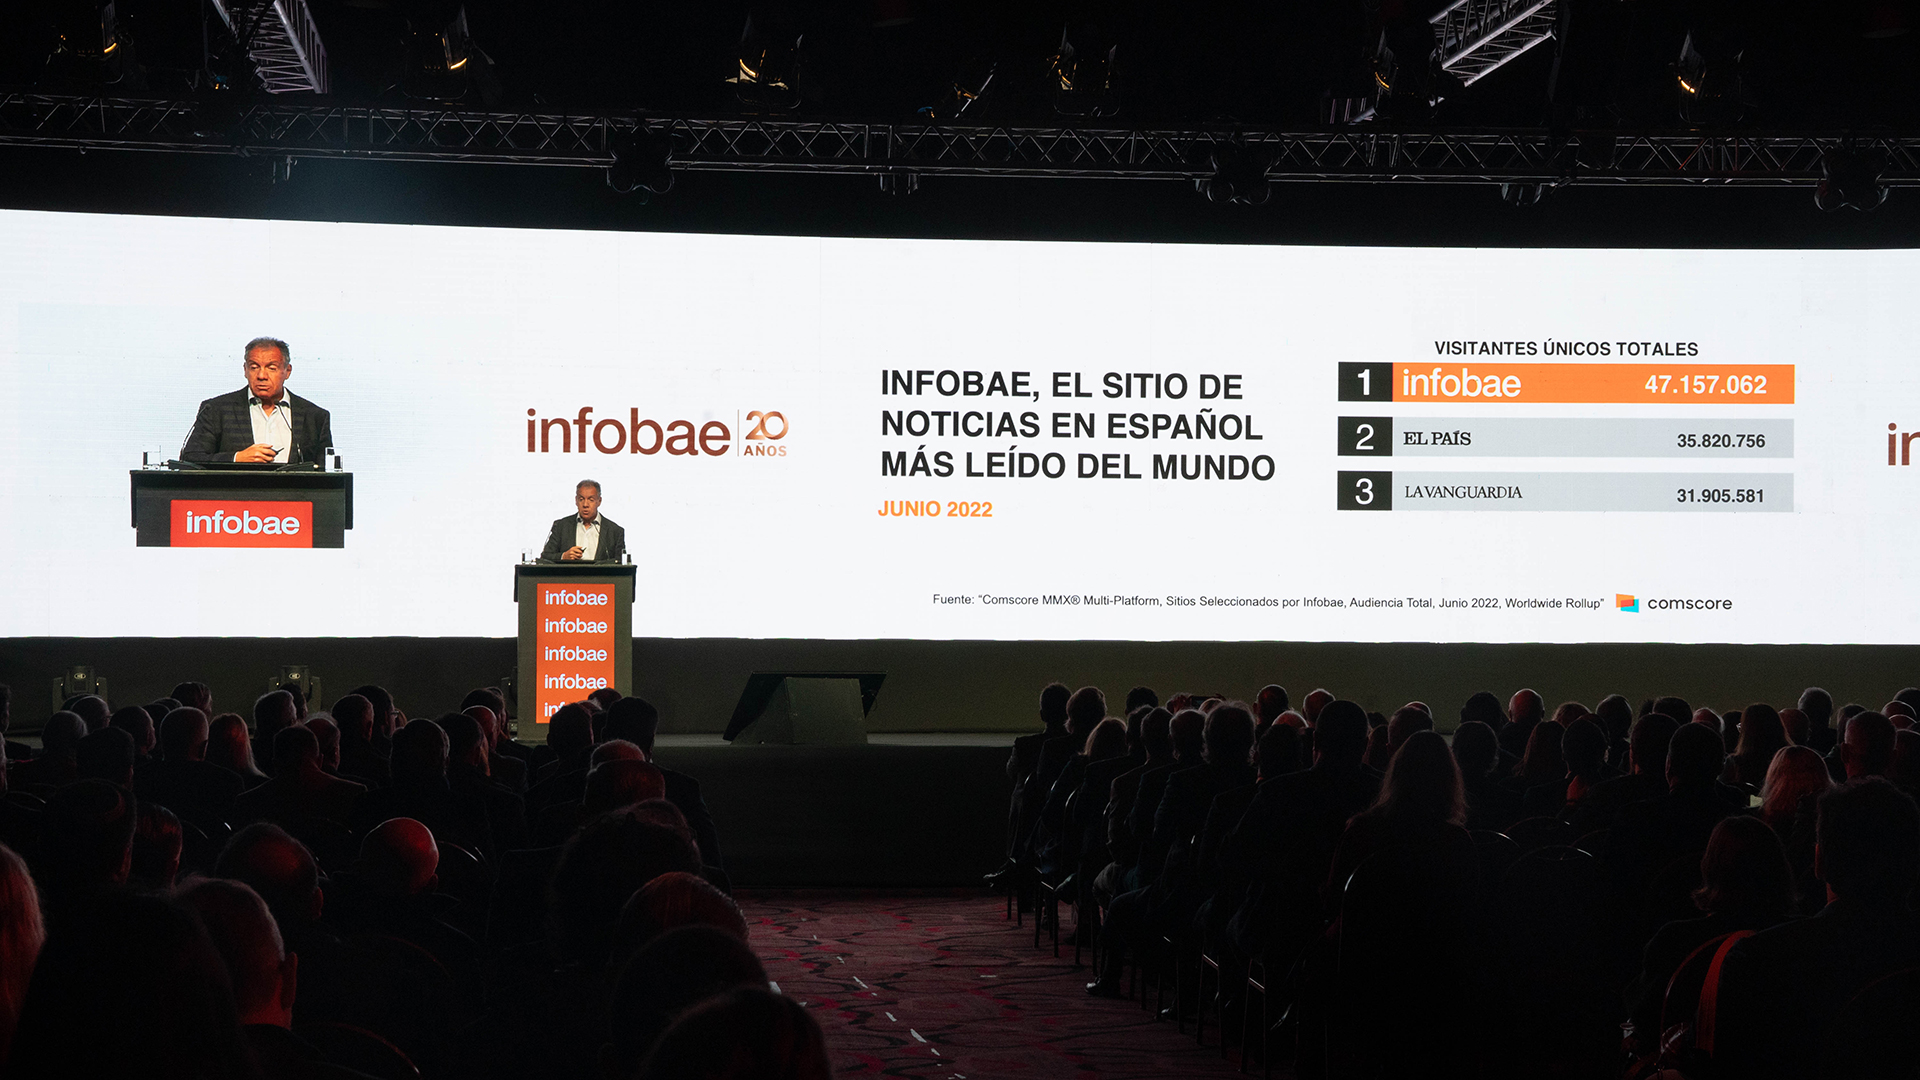 Daniel Hadad, founder and CEO of Infobae, during his message to the guests at the celebration in La Rural for the 20 years of the company (Infobae)